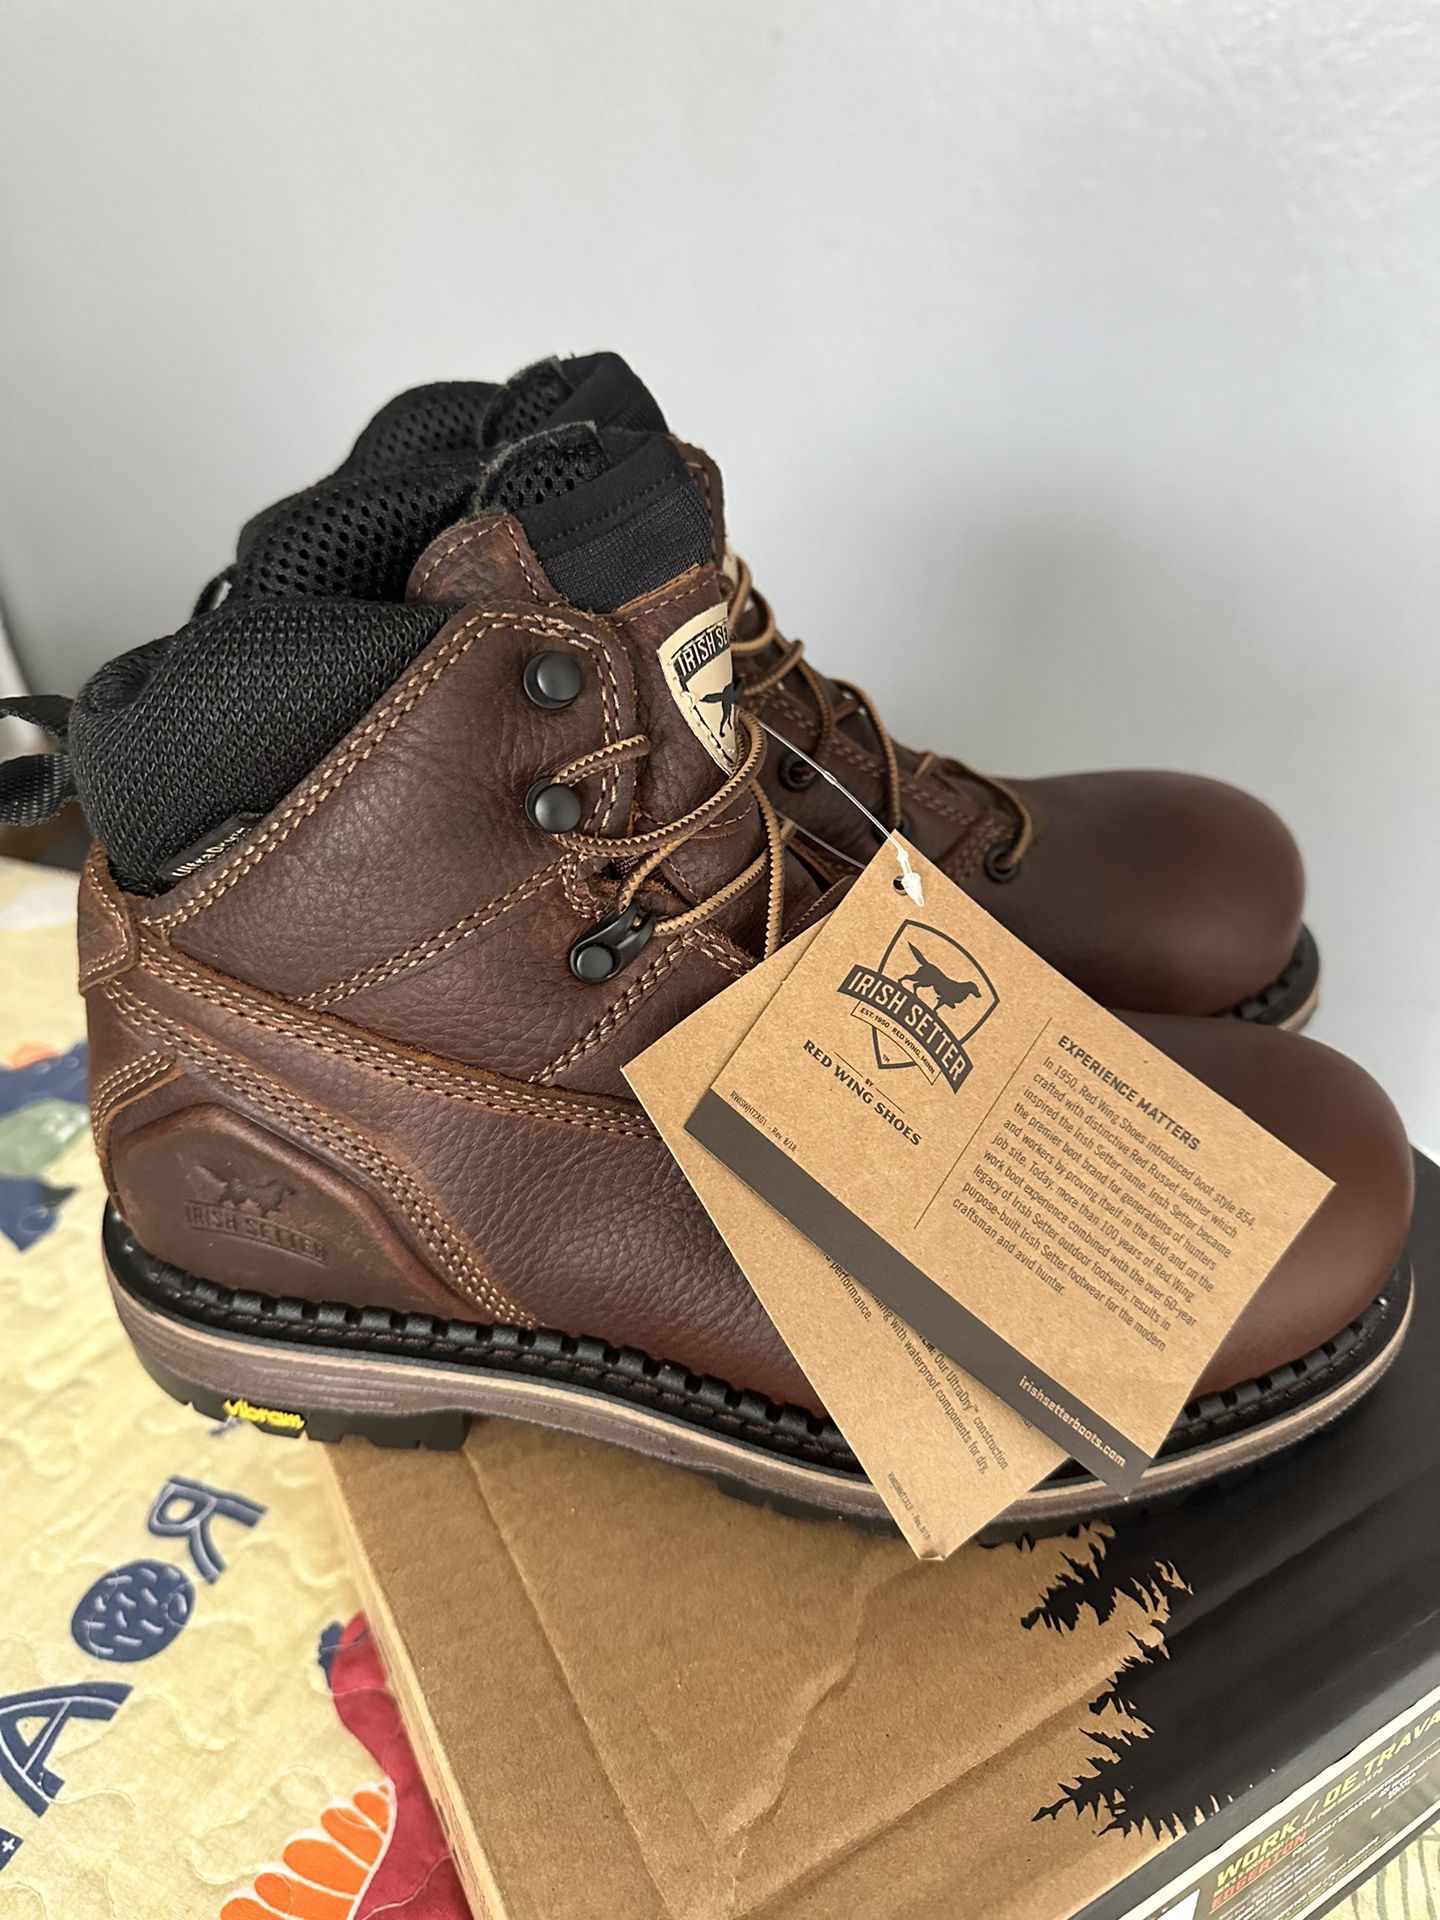 Brand New Red Wing Iris Setter Work Boots For Men. Sizes 8.5, 9, 9.5 10 And 10.5. Steel Toe